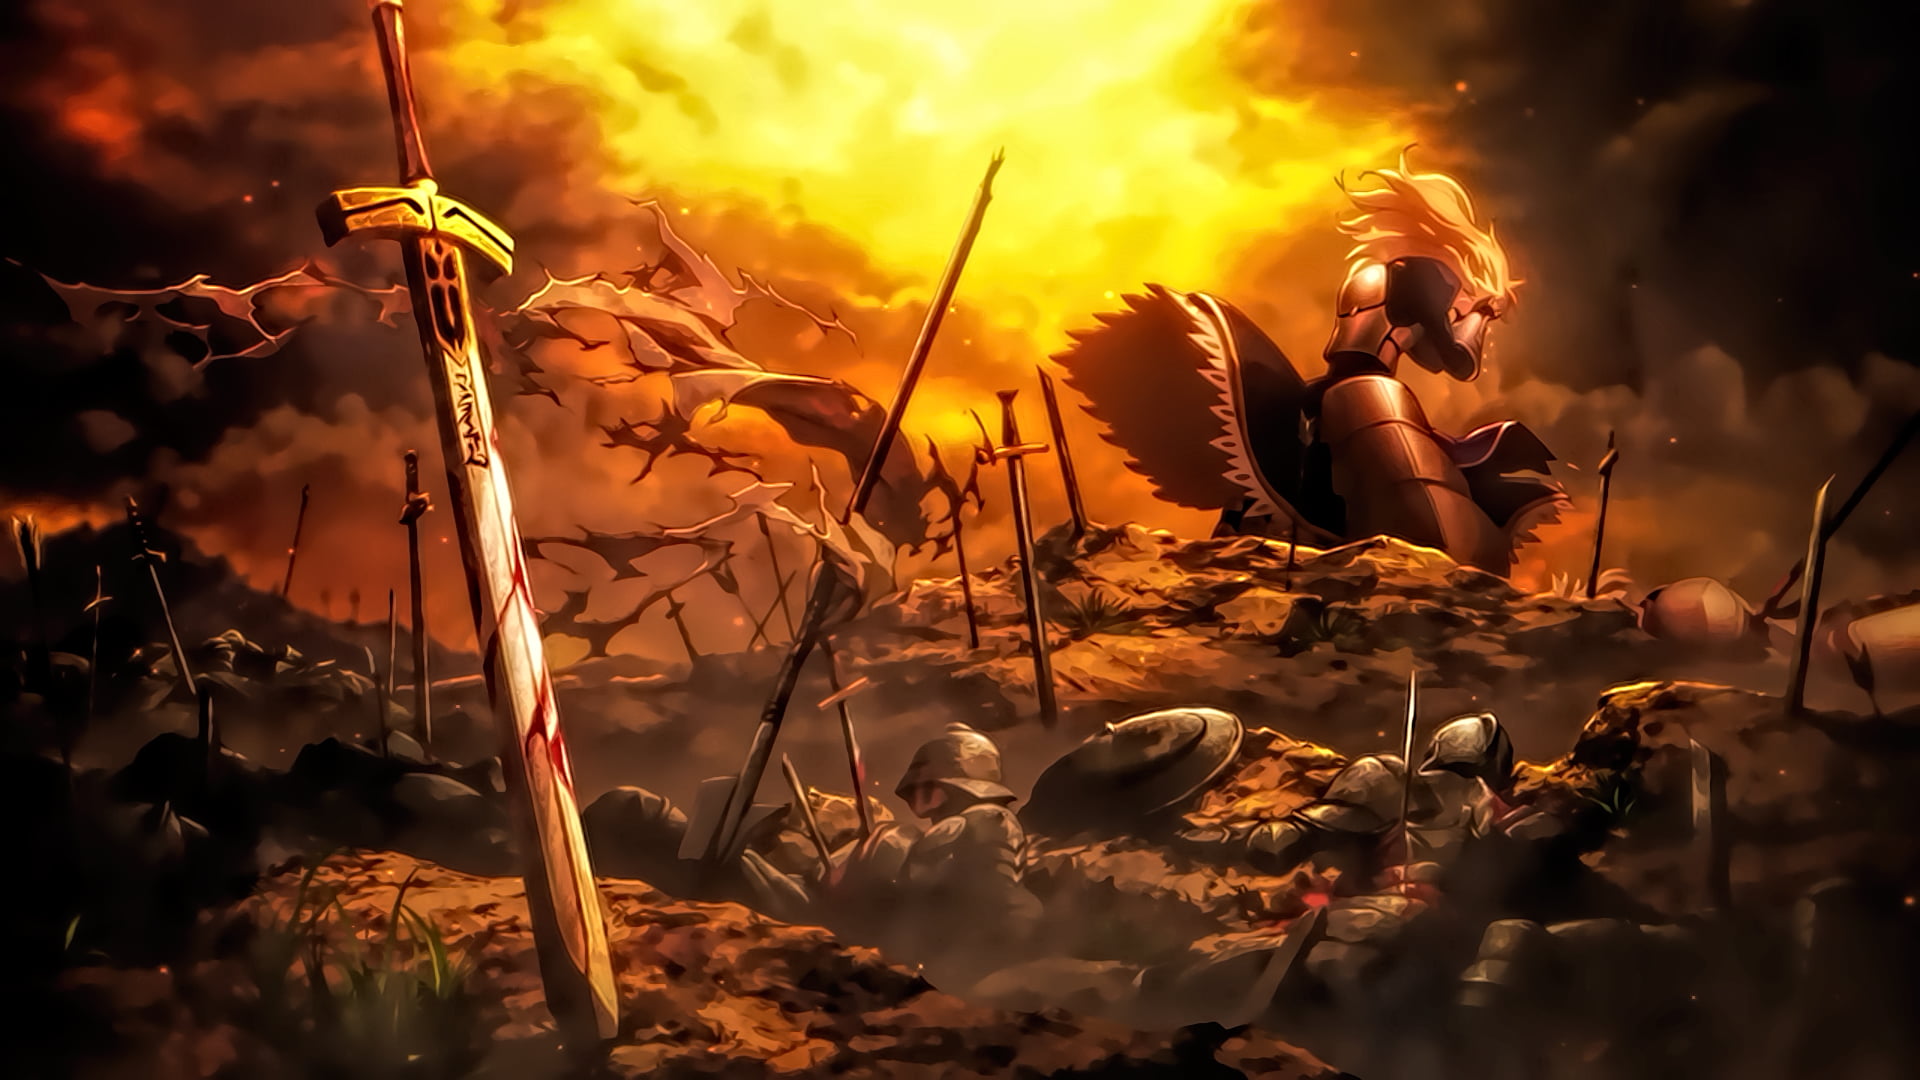 Anime Character Surrounding Swords Illustration Saber Fate Stay Night Unlimited Blade Works Hd Wallpaper Wallpaper Flare